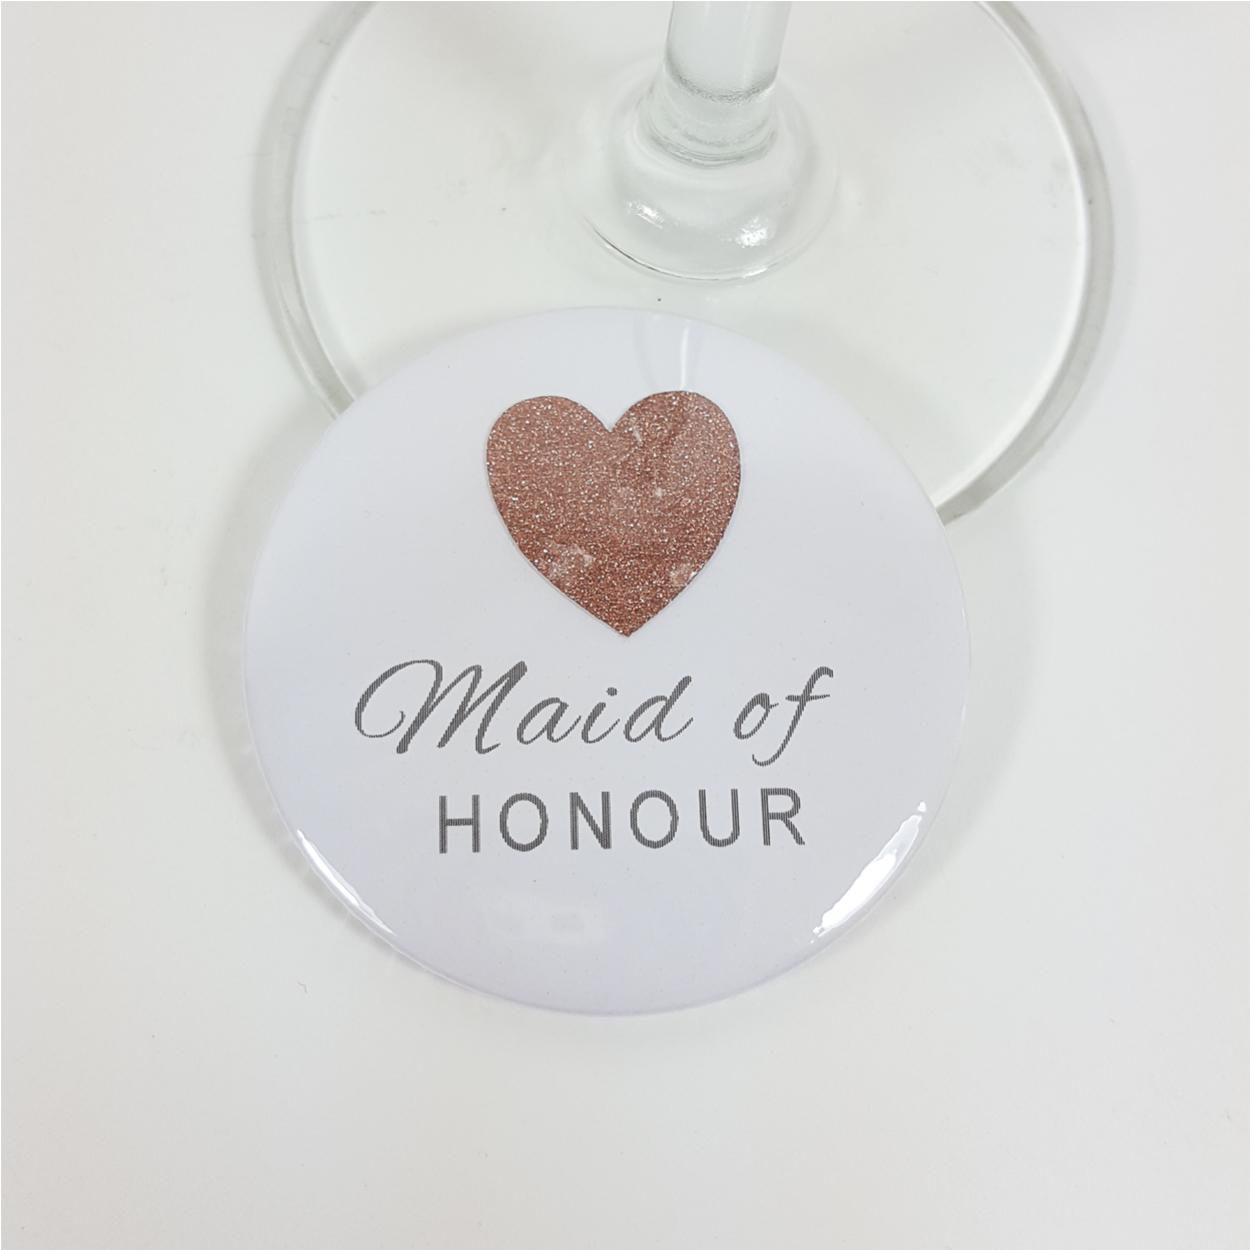 Personalised hen party badges with real sparkly glitter